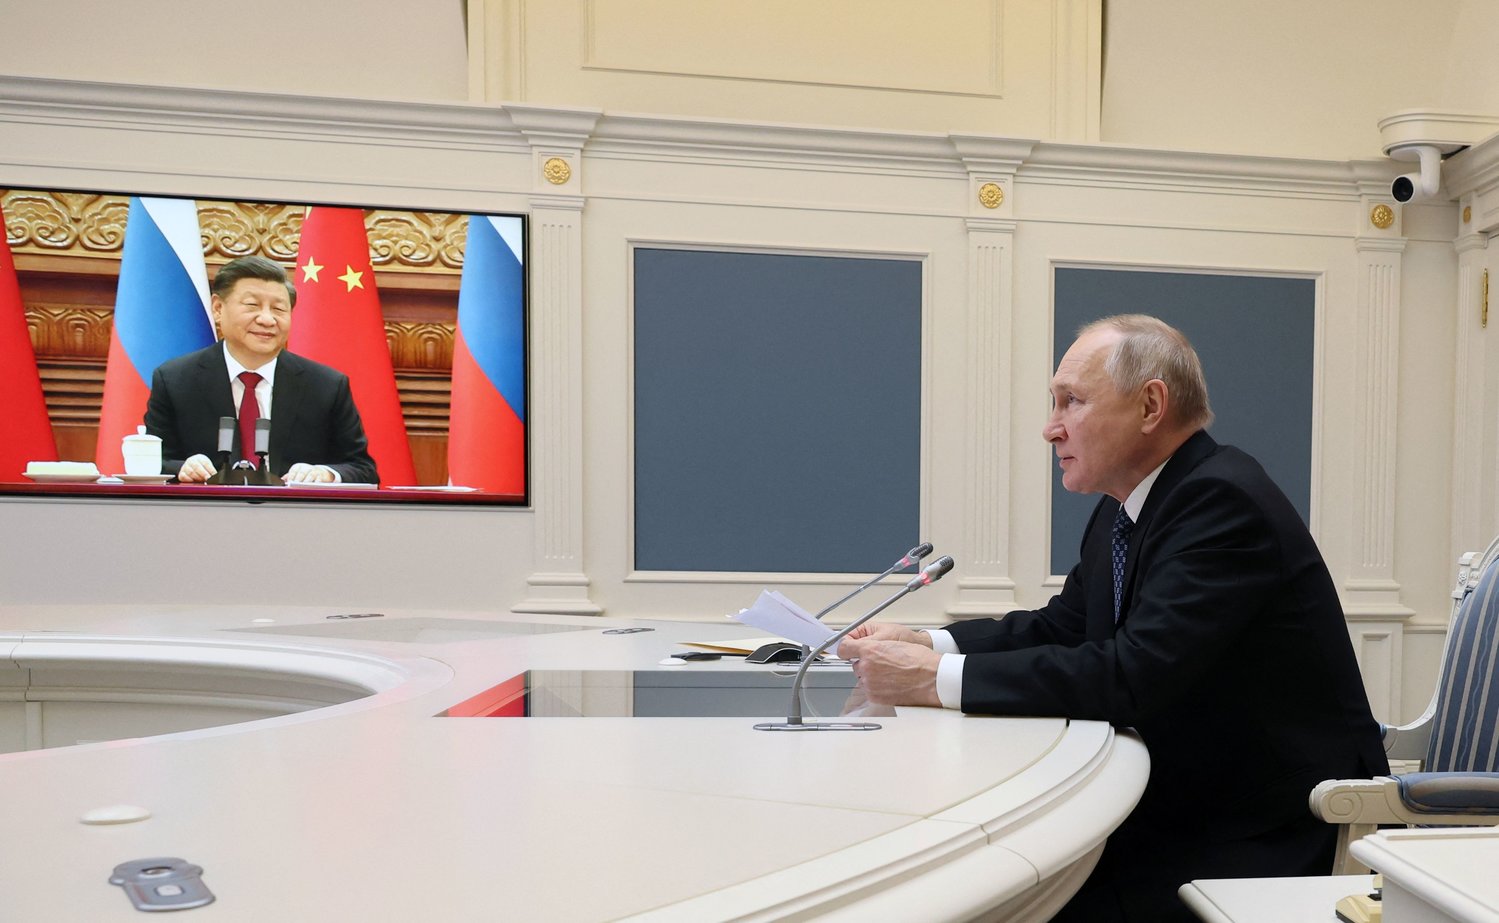 Russian President Vladimir Putin holds a meeting with Chinese President Xi Jinping via a video link at the Kremlin in Moscow on December 30, 2022. - Russian leader told his Chinese counterpart on December 30 he was keen to ramp up military cooperation and hailed the two countries' efforts to counter Western influence. (MIKHAIL KLIMENTYEV/SPUTNIK/AFP via Getty Images/TNS)